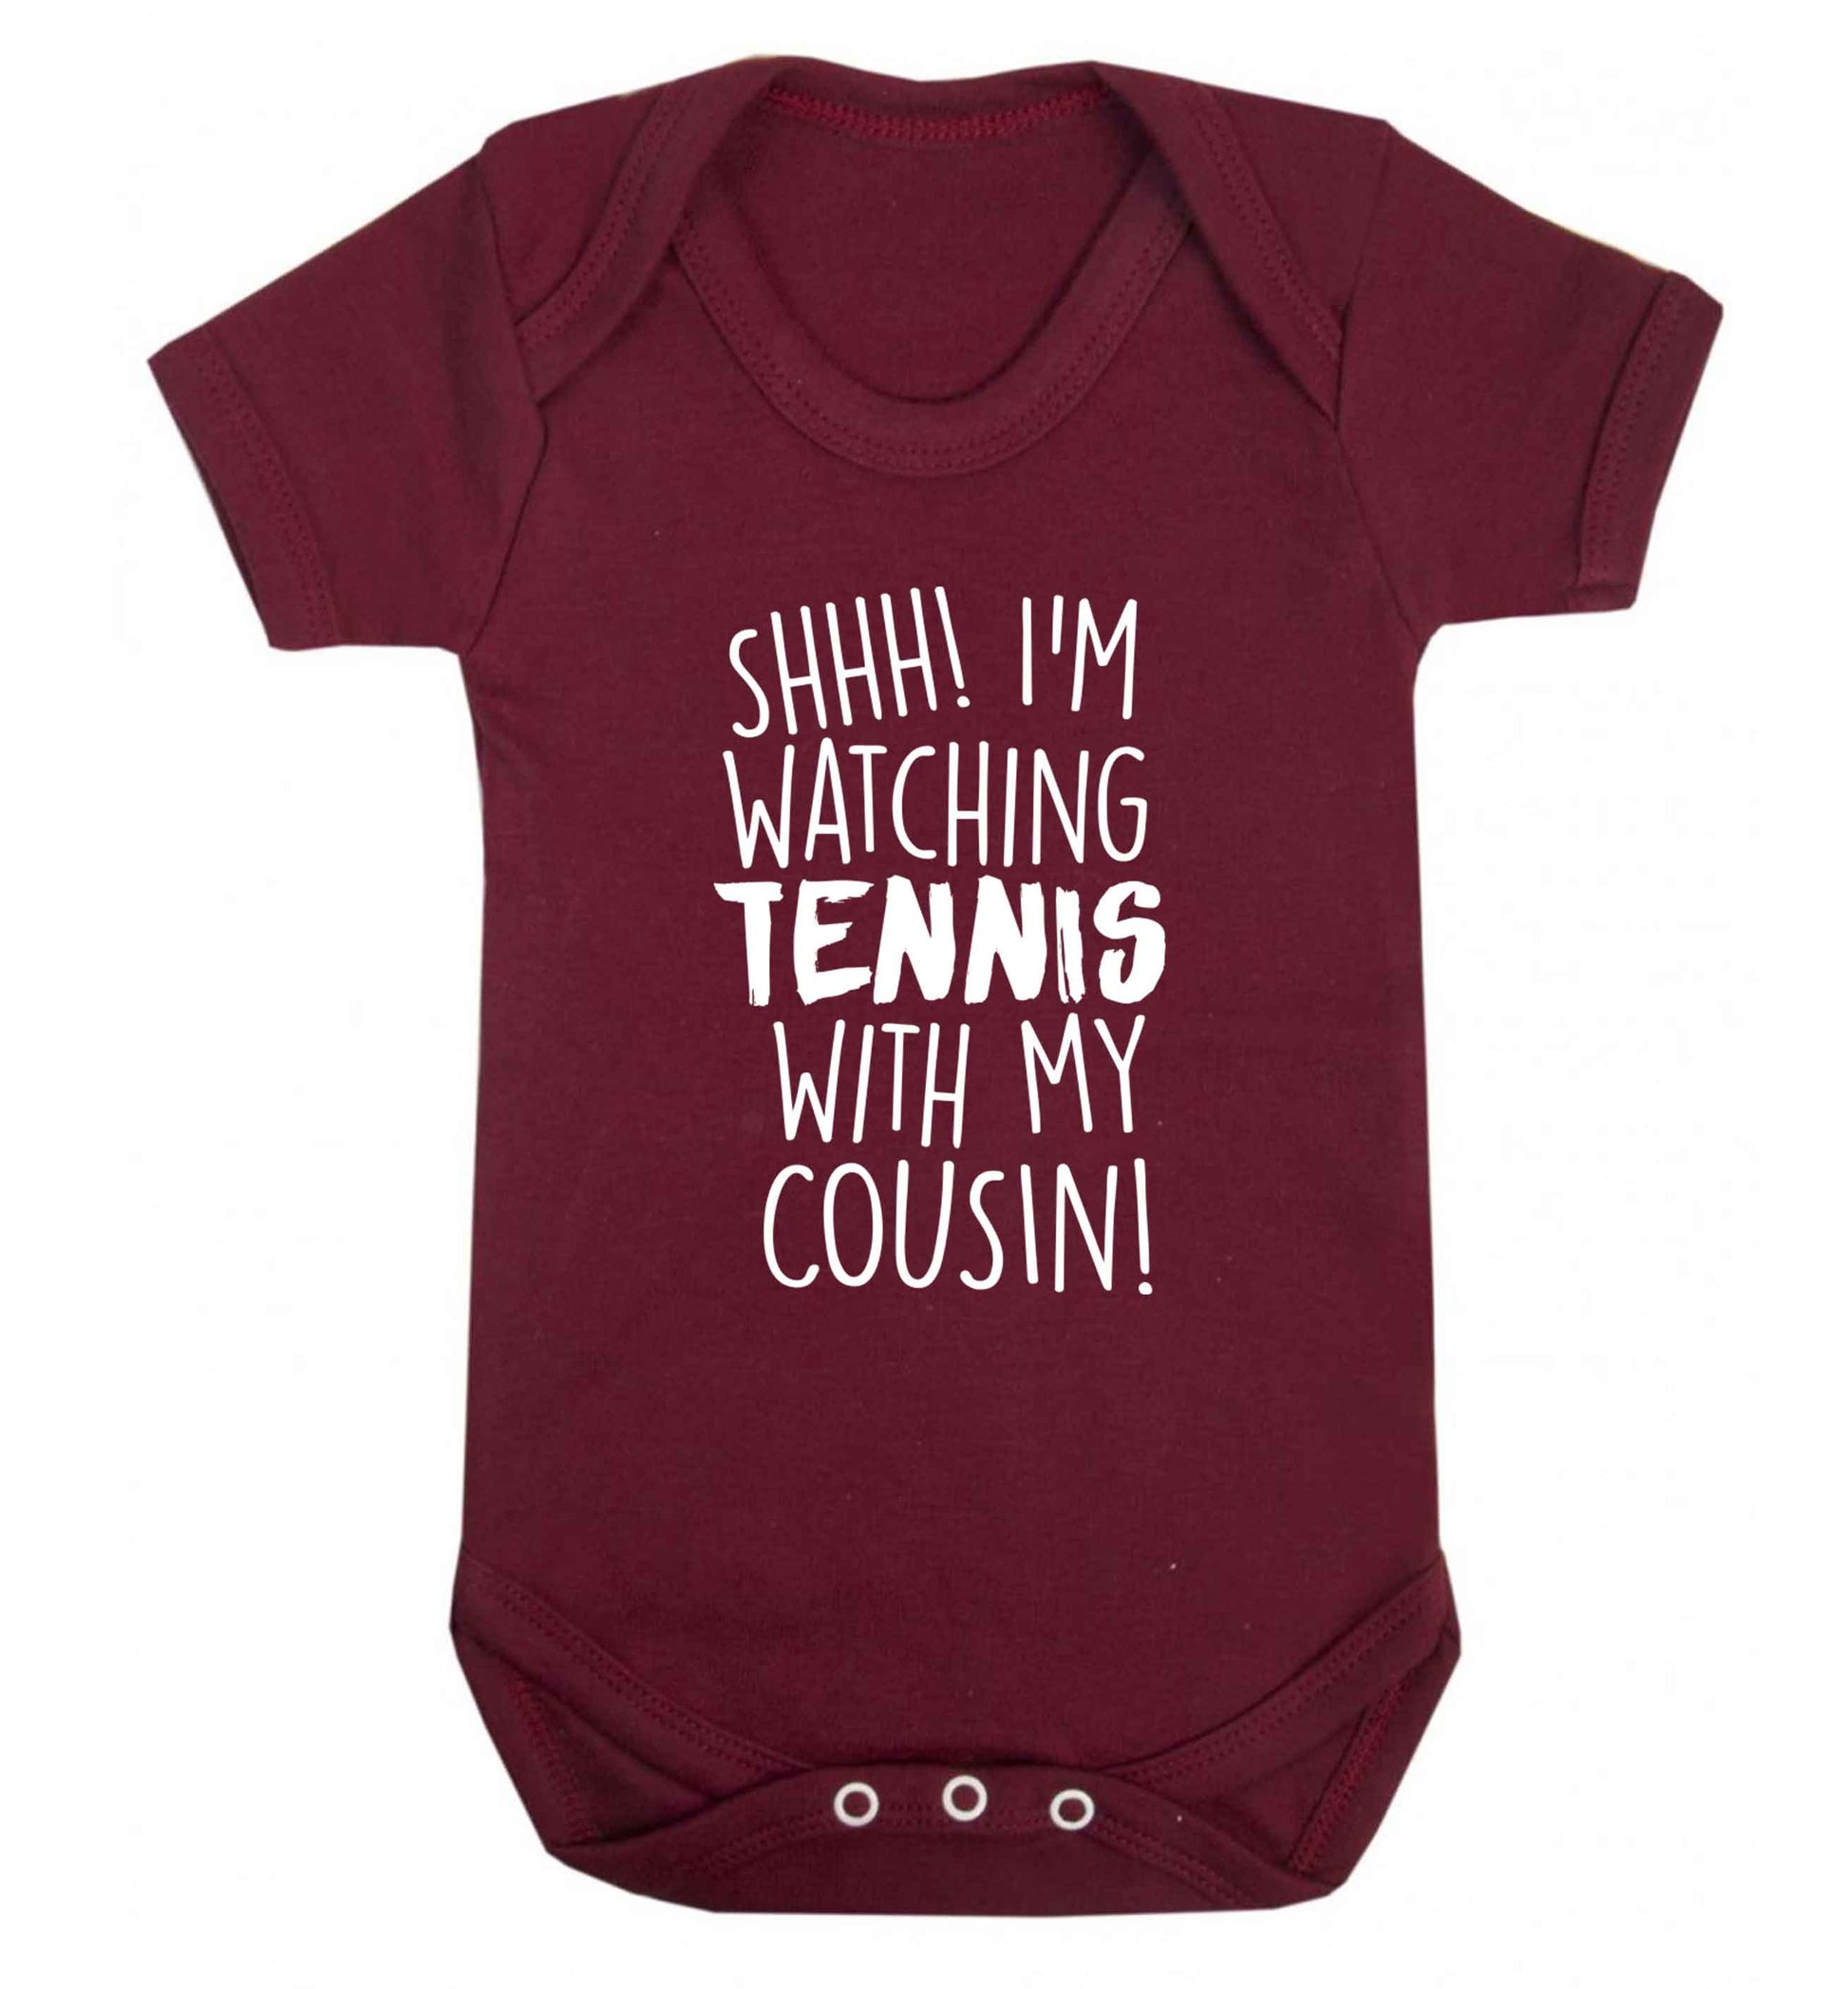 Shh! I'm watching tennis with my cousin! Baby Vest maroon 18-24 months